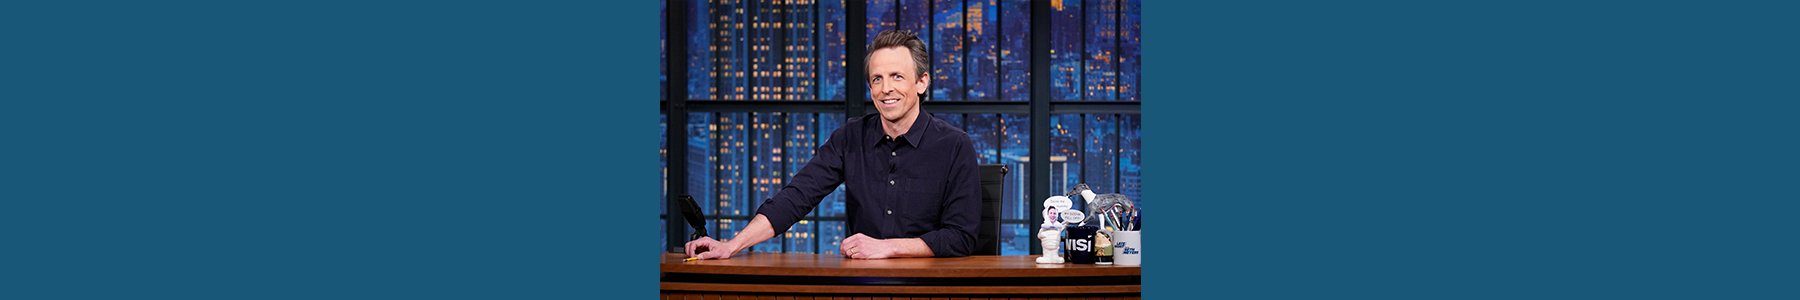 Late Night with Seth Meyers - The Shop at NBC Studios